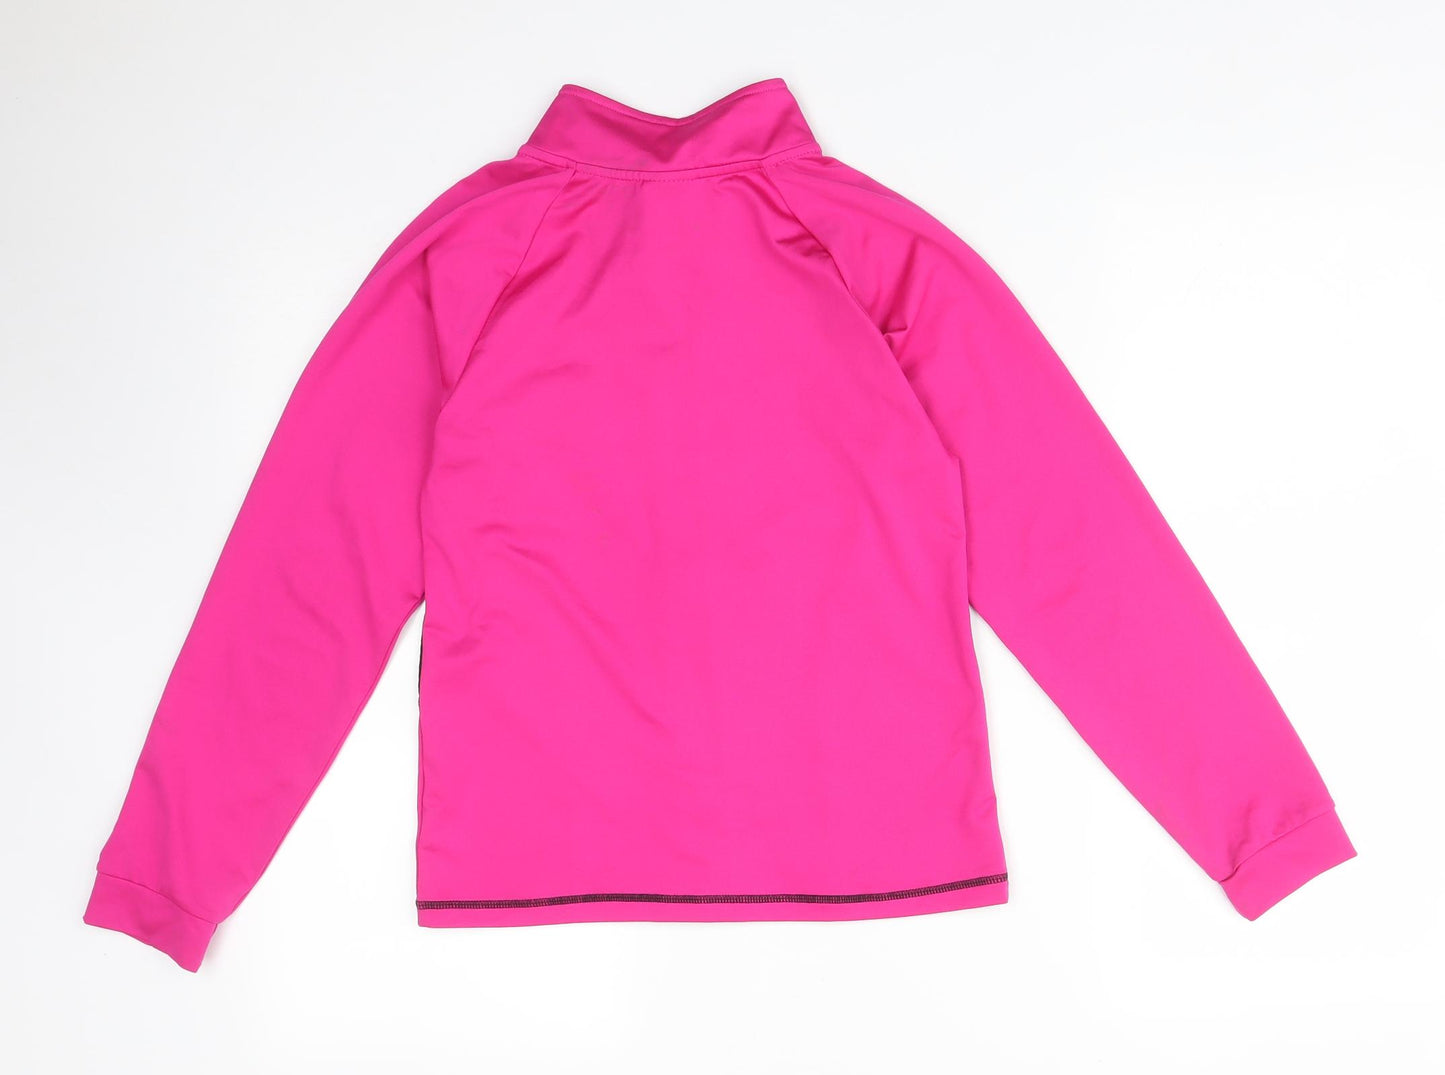 George Girls Pink   Jacket  Size 12-13 Years